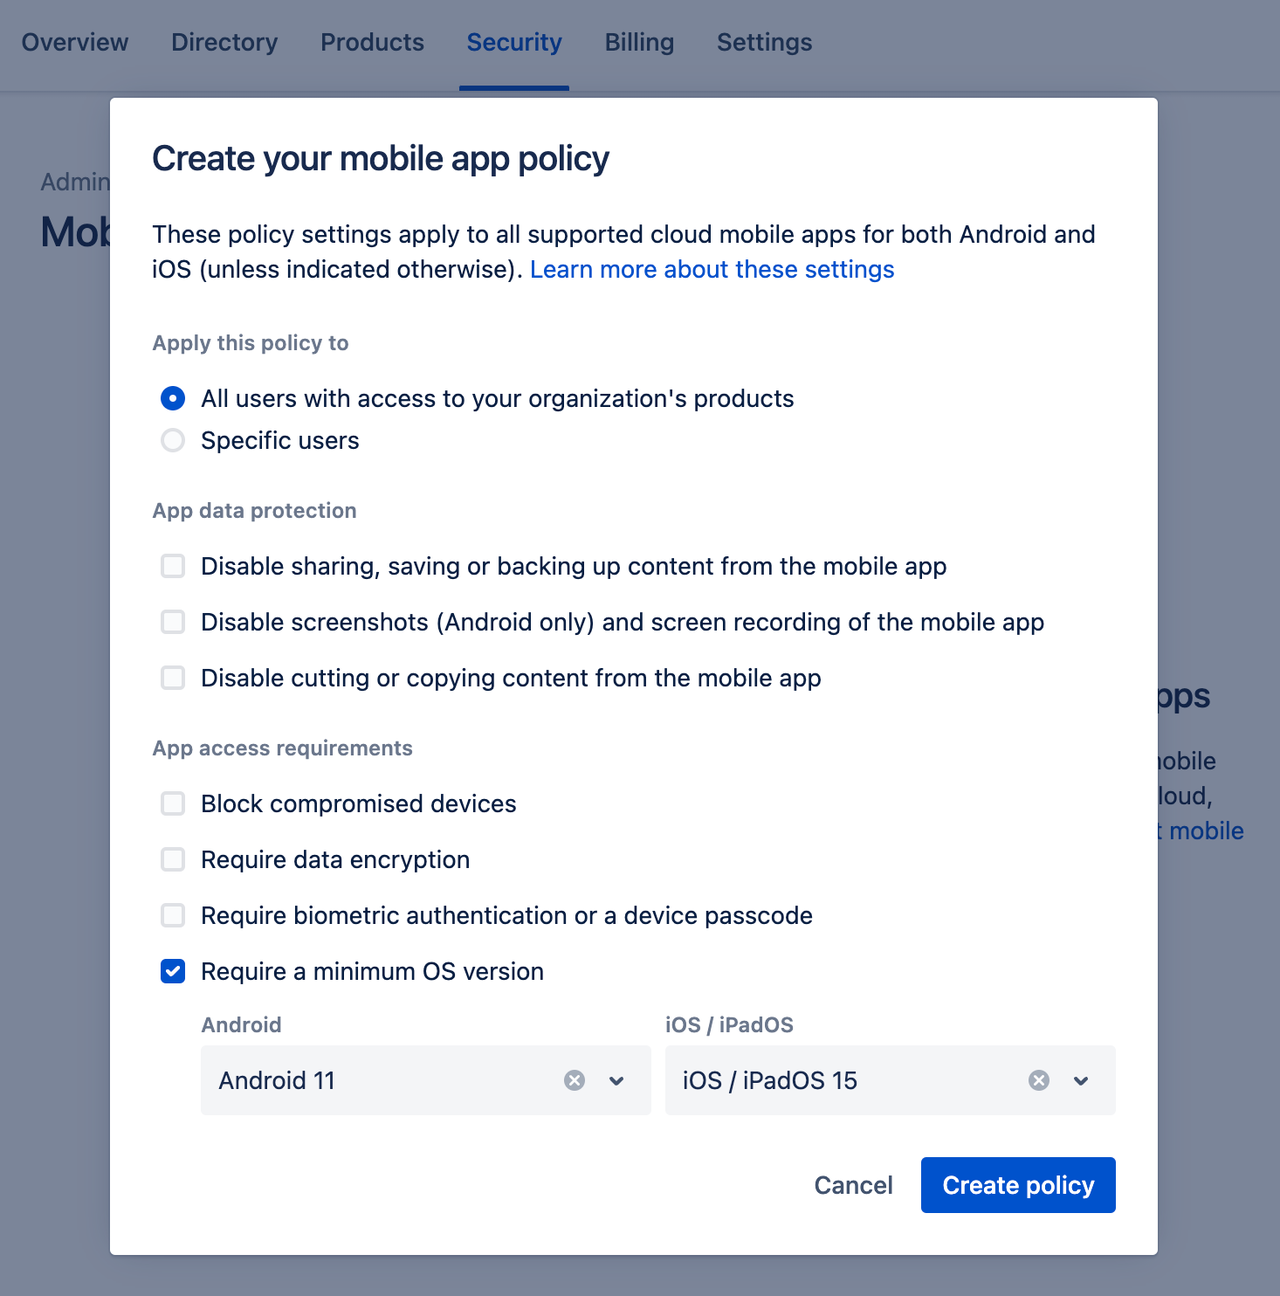 Screenshot of the security settings available for mobile policy